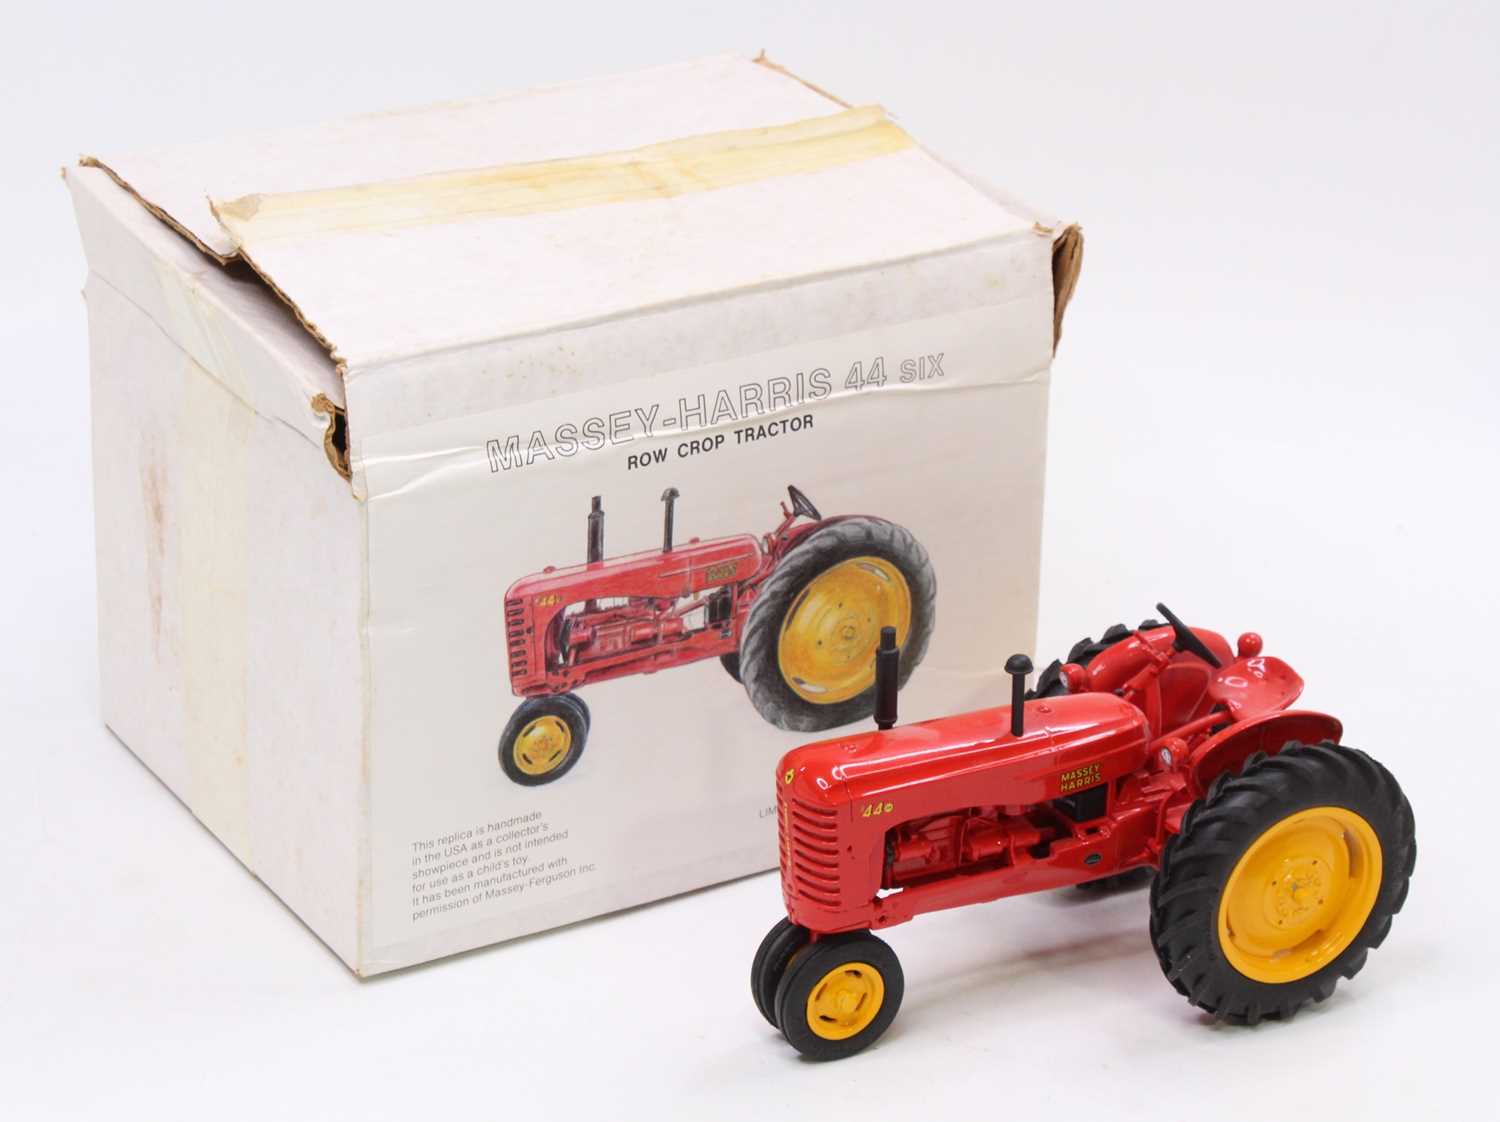 A Stephan Toys of USA 1/16th scale Massey Harris 44 six Row Crop Tractor, a limited edition sold